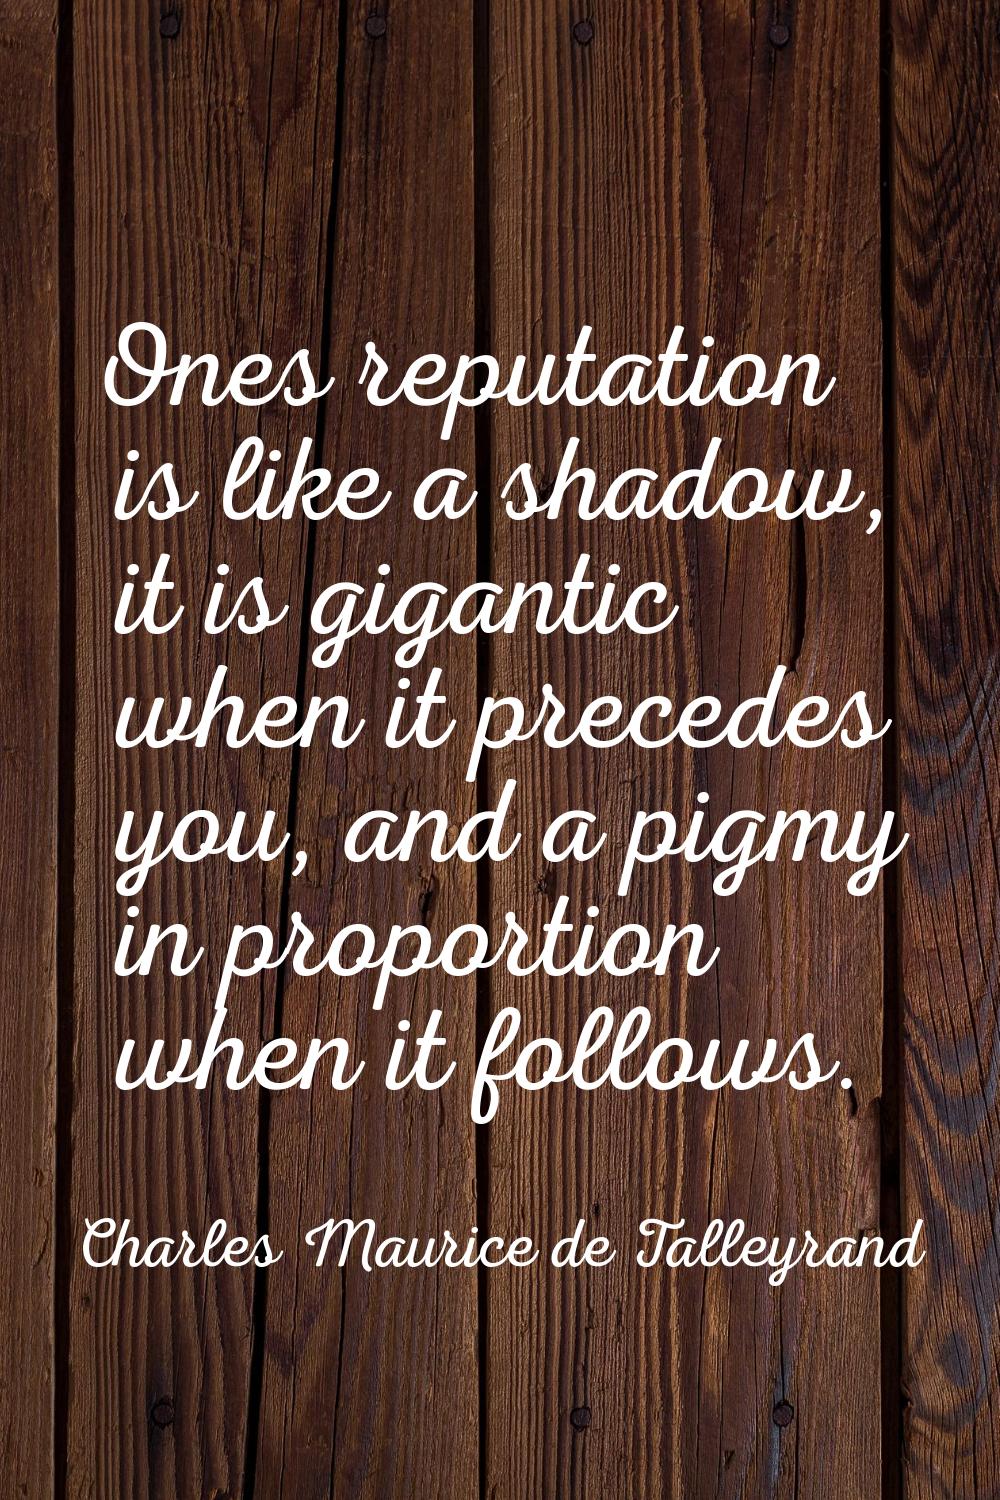 Ones reputation is like a shadow, it is gigantic when it precedes you, and a pigmy in proportion wh